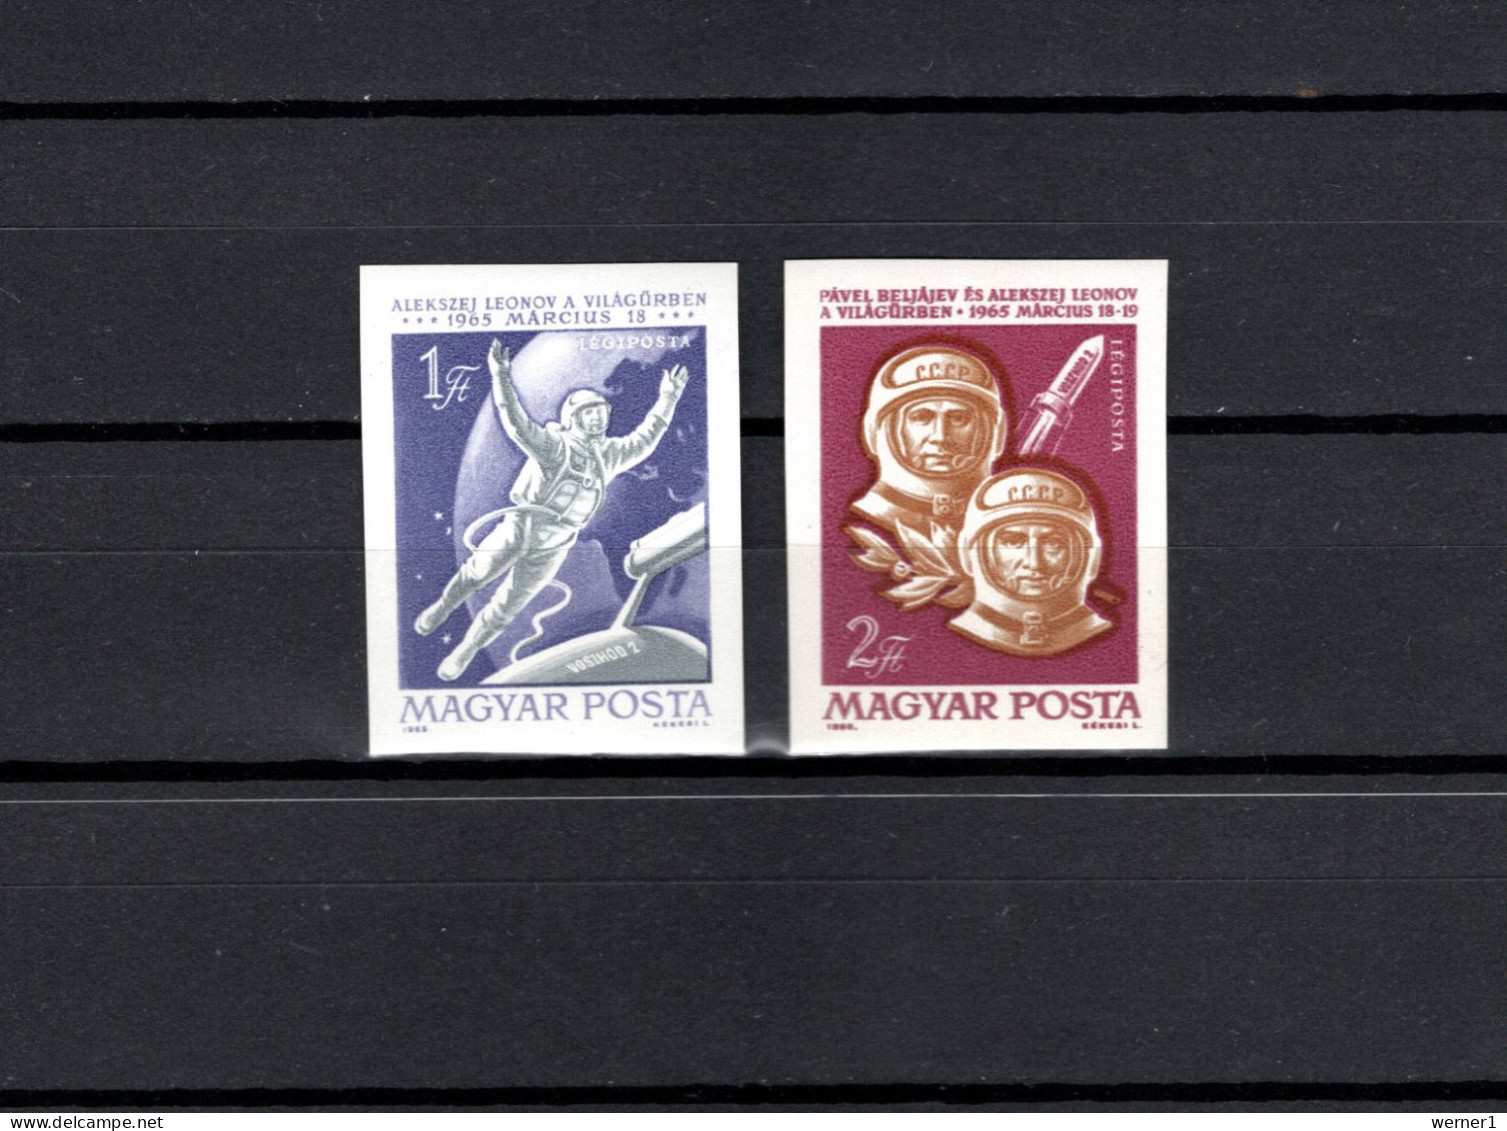 Hungary 1965 Space, Voshod 2, Set Of 2 Imperf. MNH -scarce- - Europa